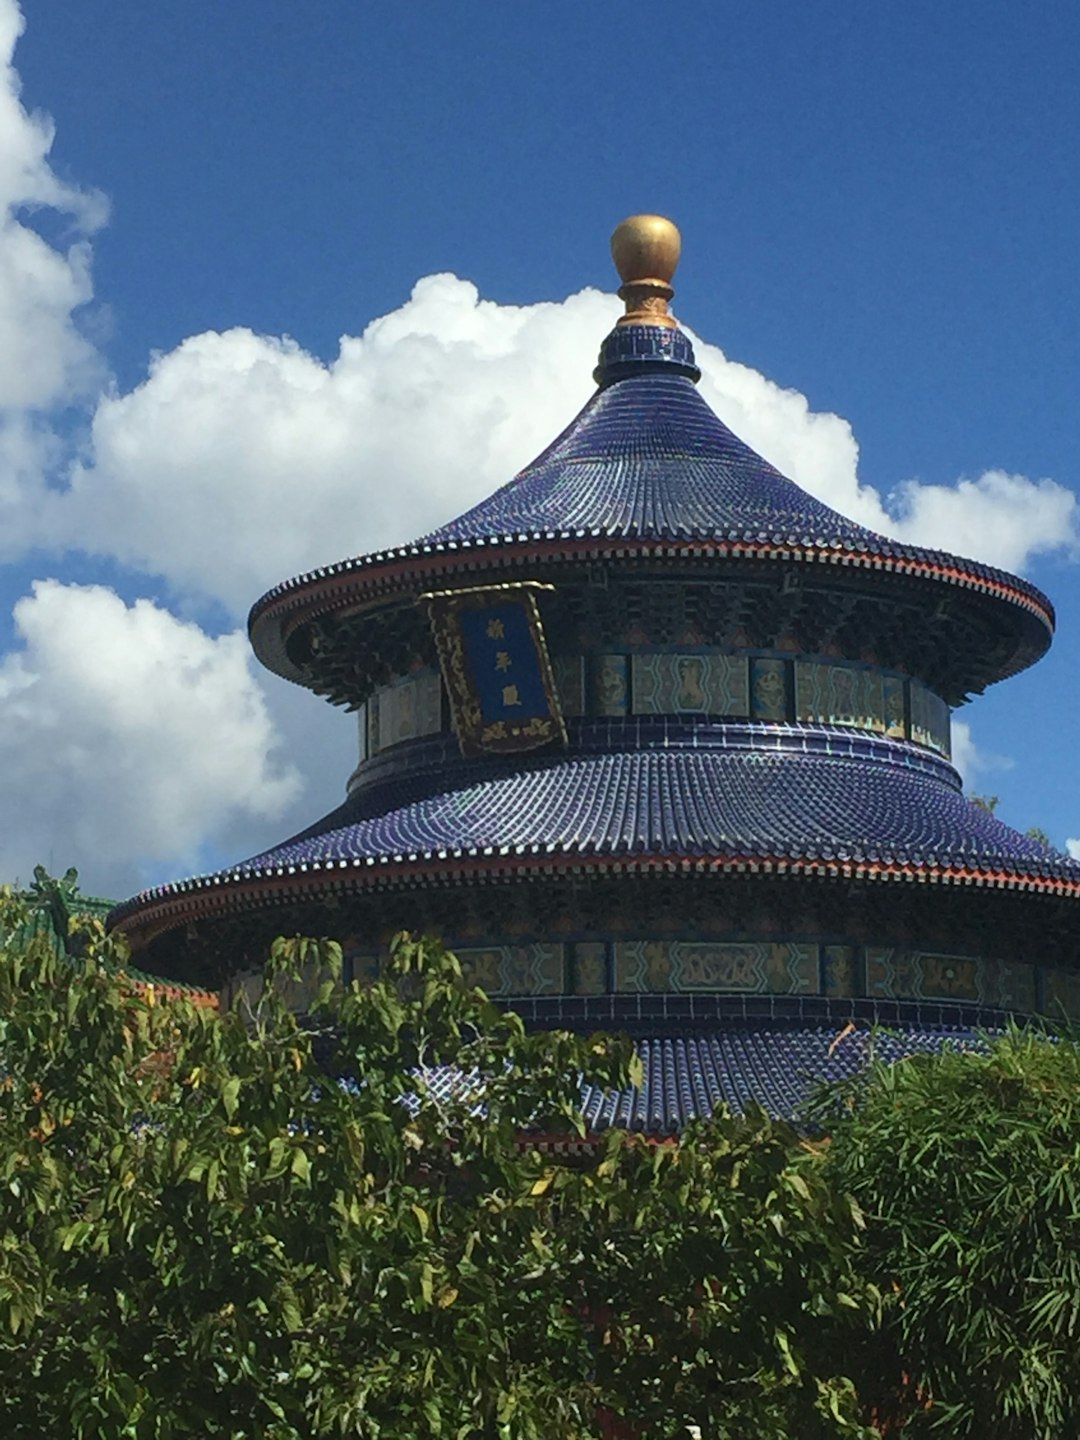 Travel Tips and Stories of Epcot in United States